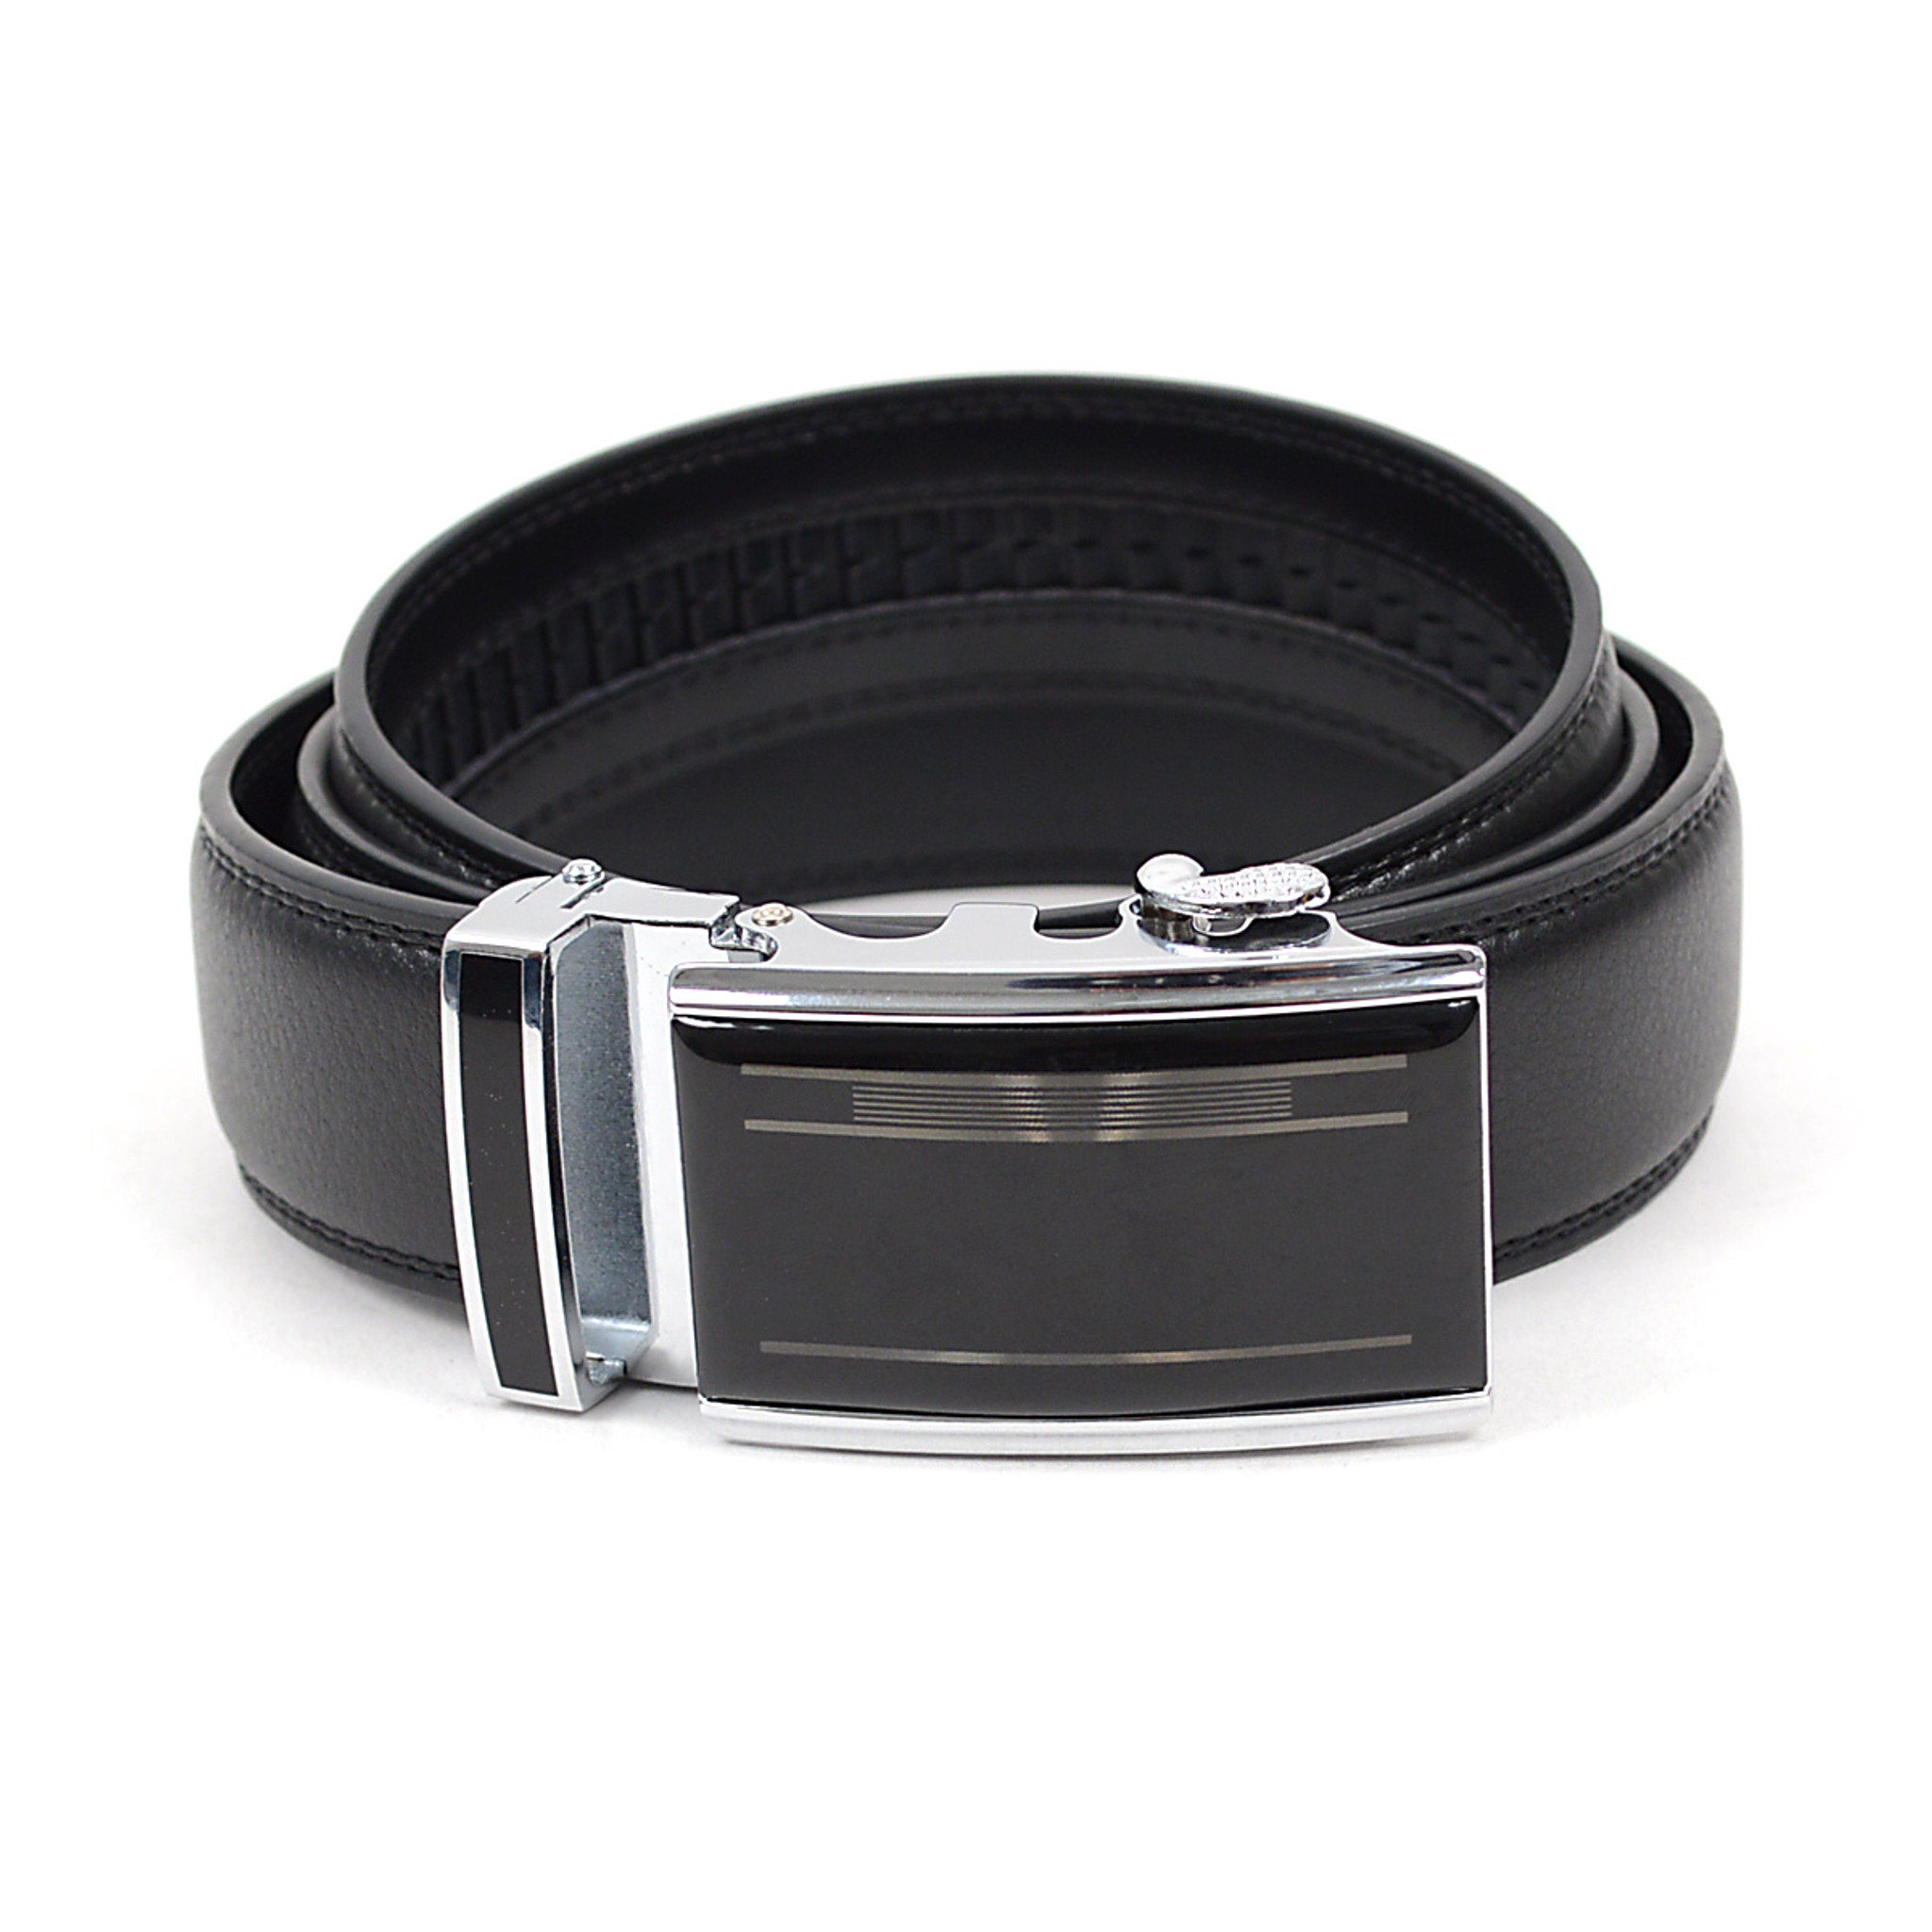 Mens Automatic Buckles Leather Belt Strap Waistband 110cm